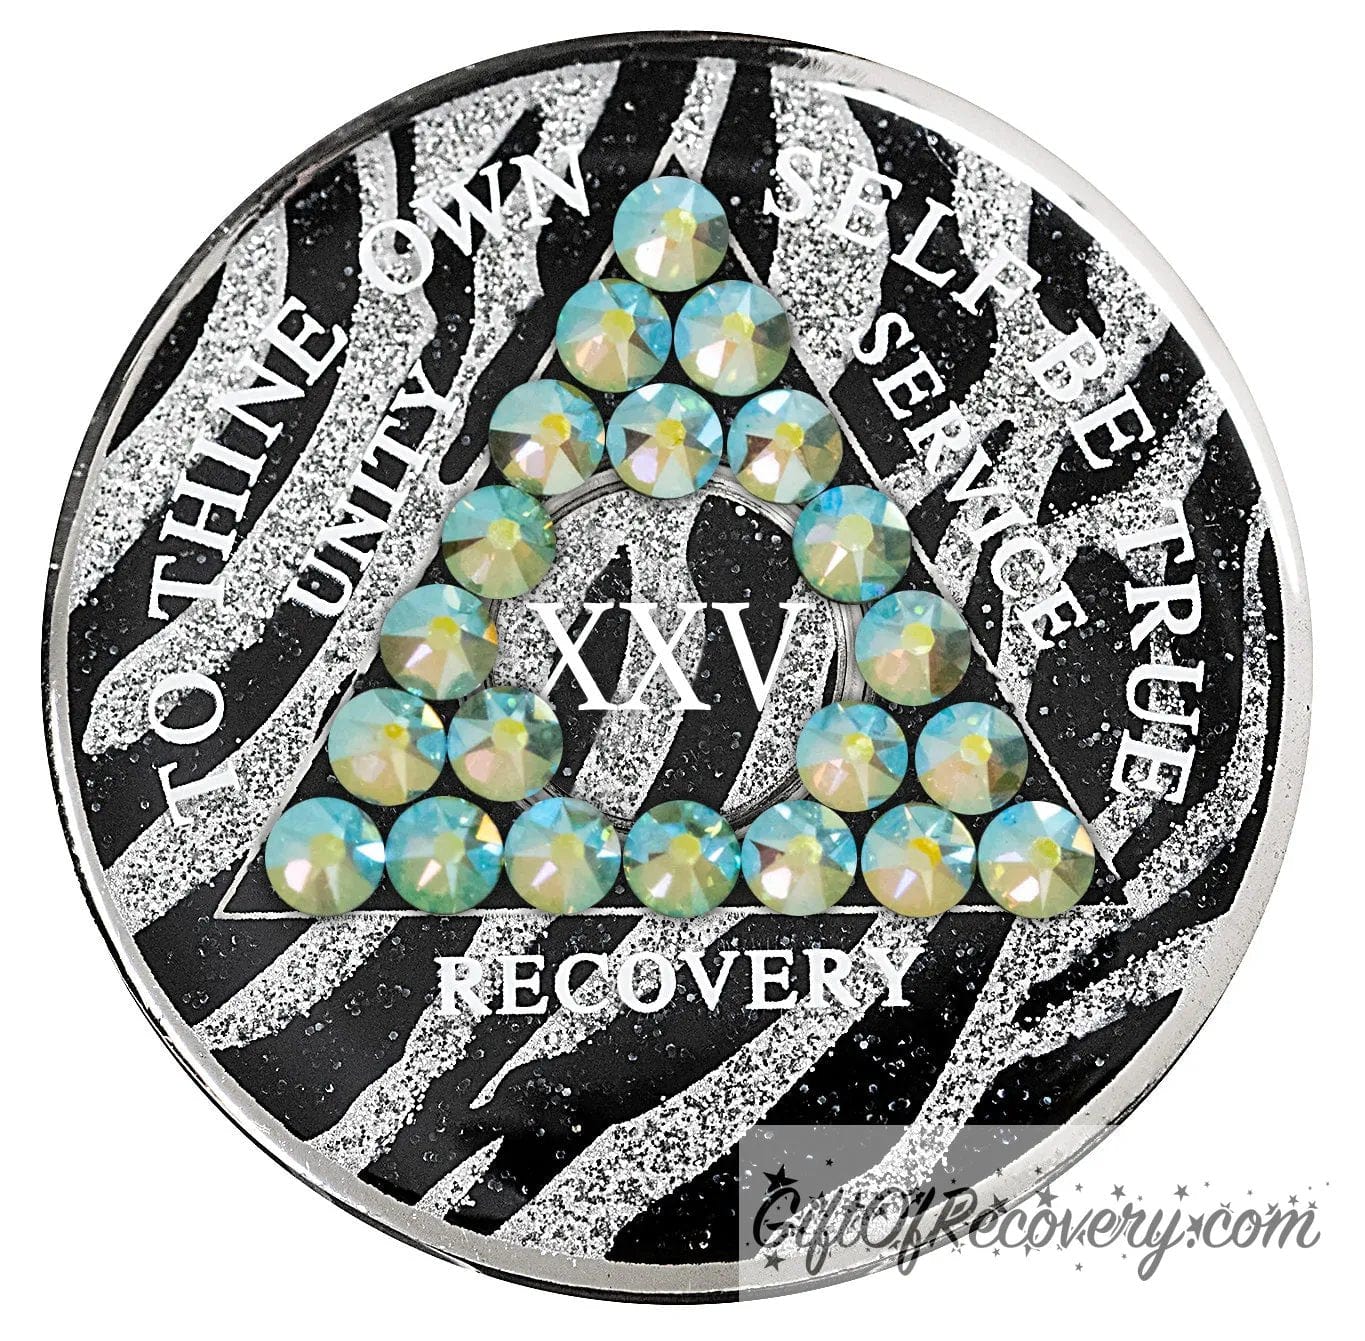 25 year Zebra glitter style AA medallion with 21 genuine peridot crystals, AA moto, unity, service, recovery, and roman numeral are in white and blend into the pattern, so you can let your recovery shine, not your time, the outer rim is silver plated, sealed in a high-quality, chip and scratch-resistant resin dome giving it a beautiful glossy look that will last.